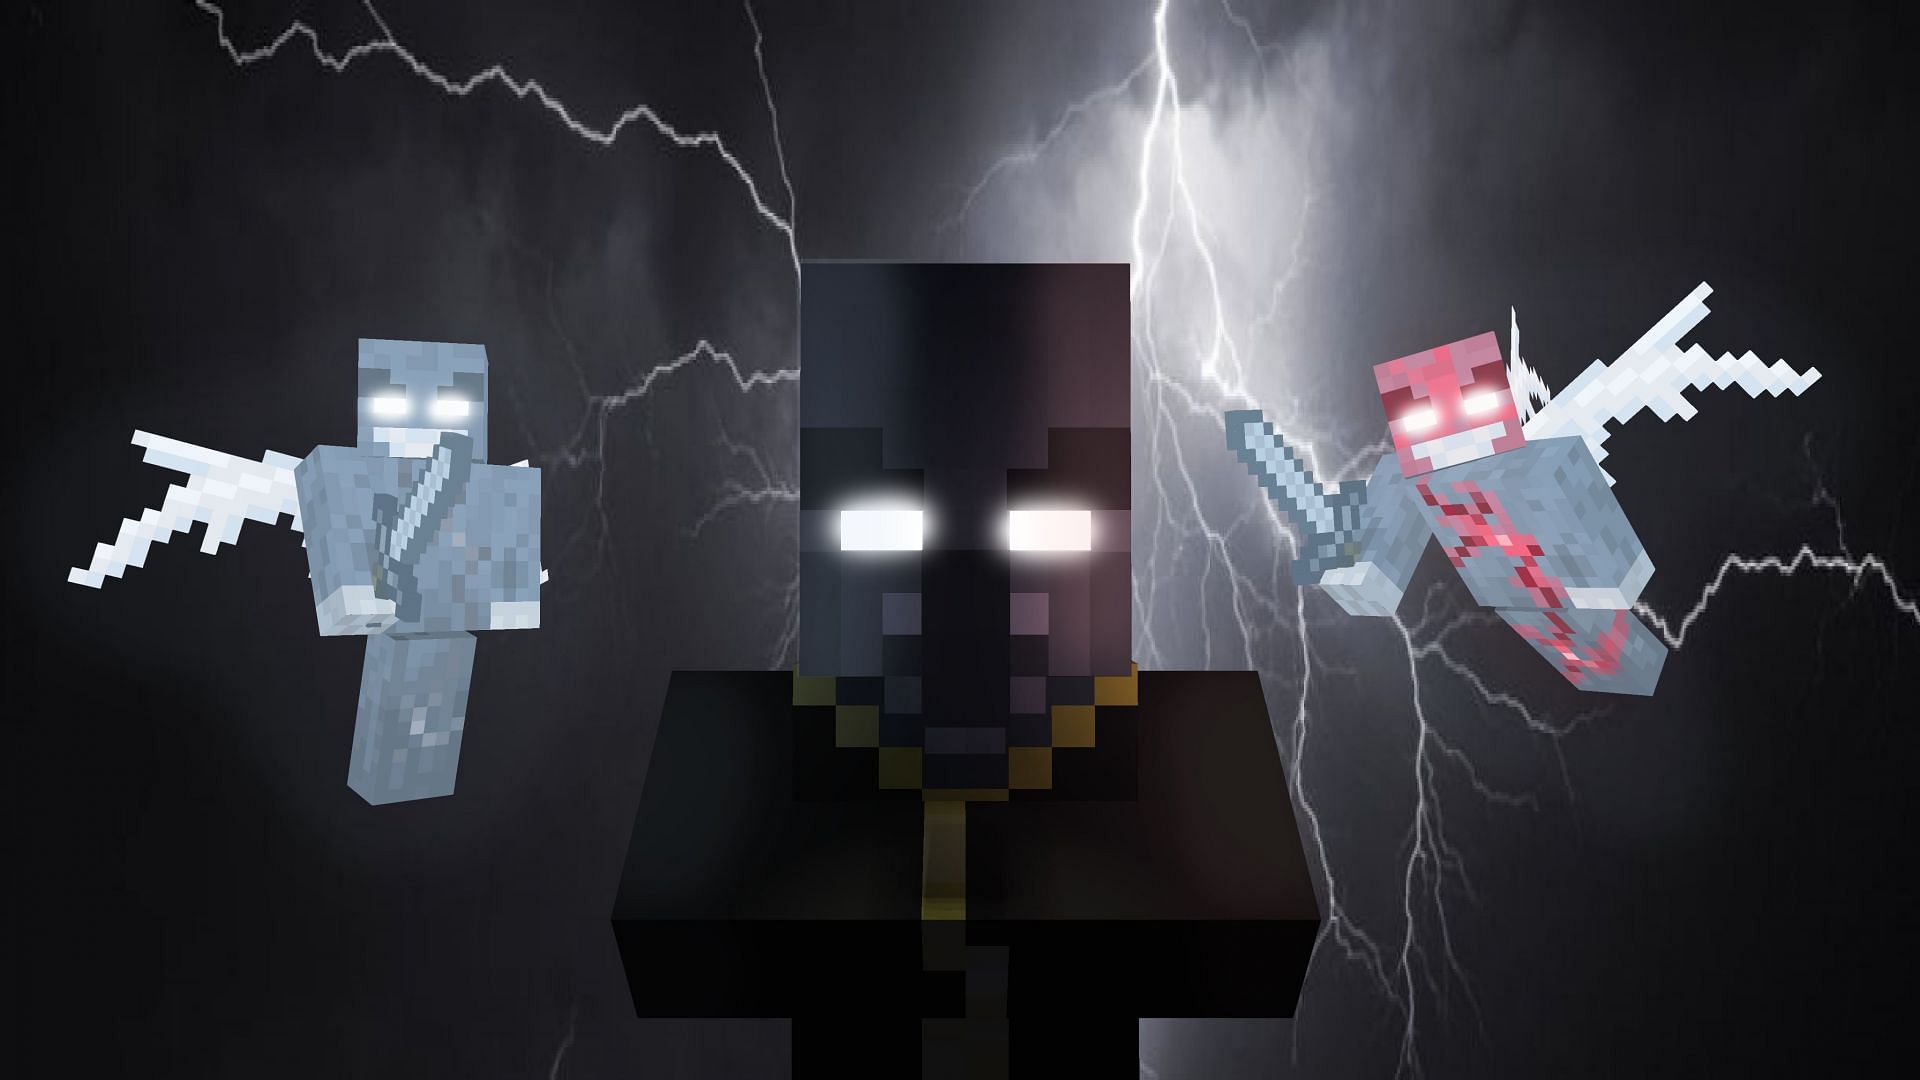 Evokers are one of the only mobs that use magic to attack in Minecraft (Art by latutart on DeviantArt)